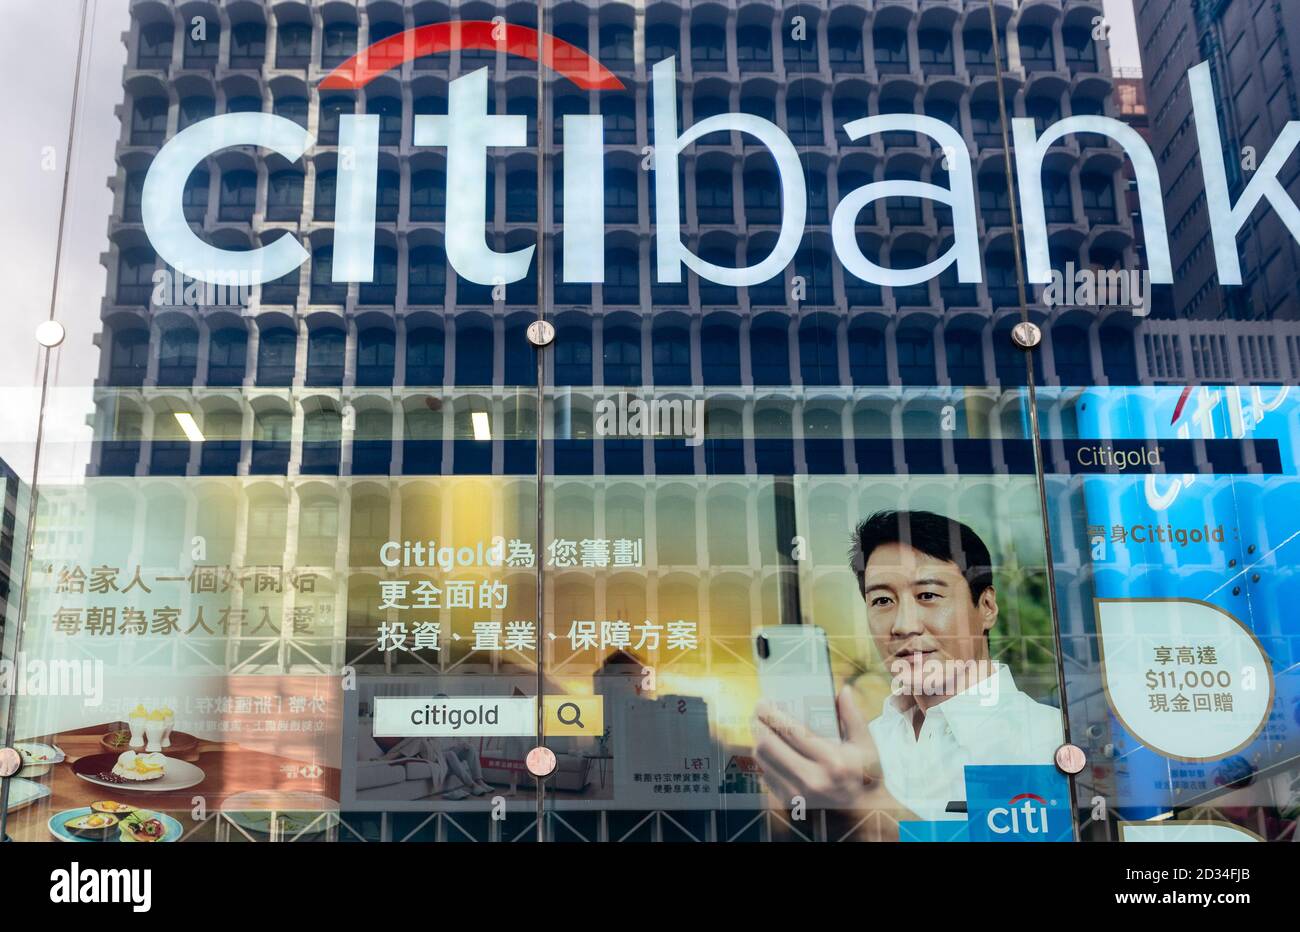 American multinational investment bank and financial services corporation Citibank or Citi logo in Hong Kong. Stock Photo